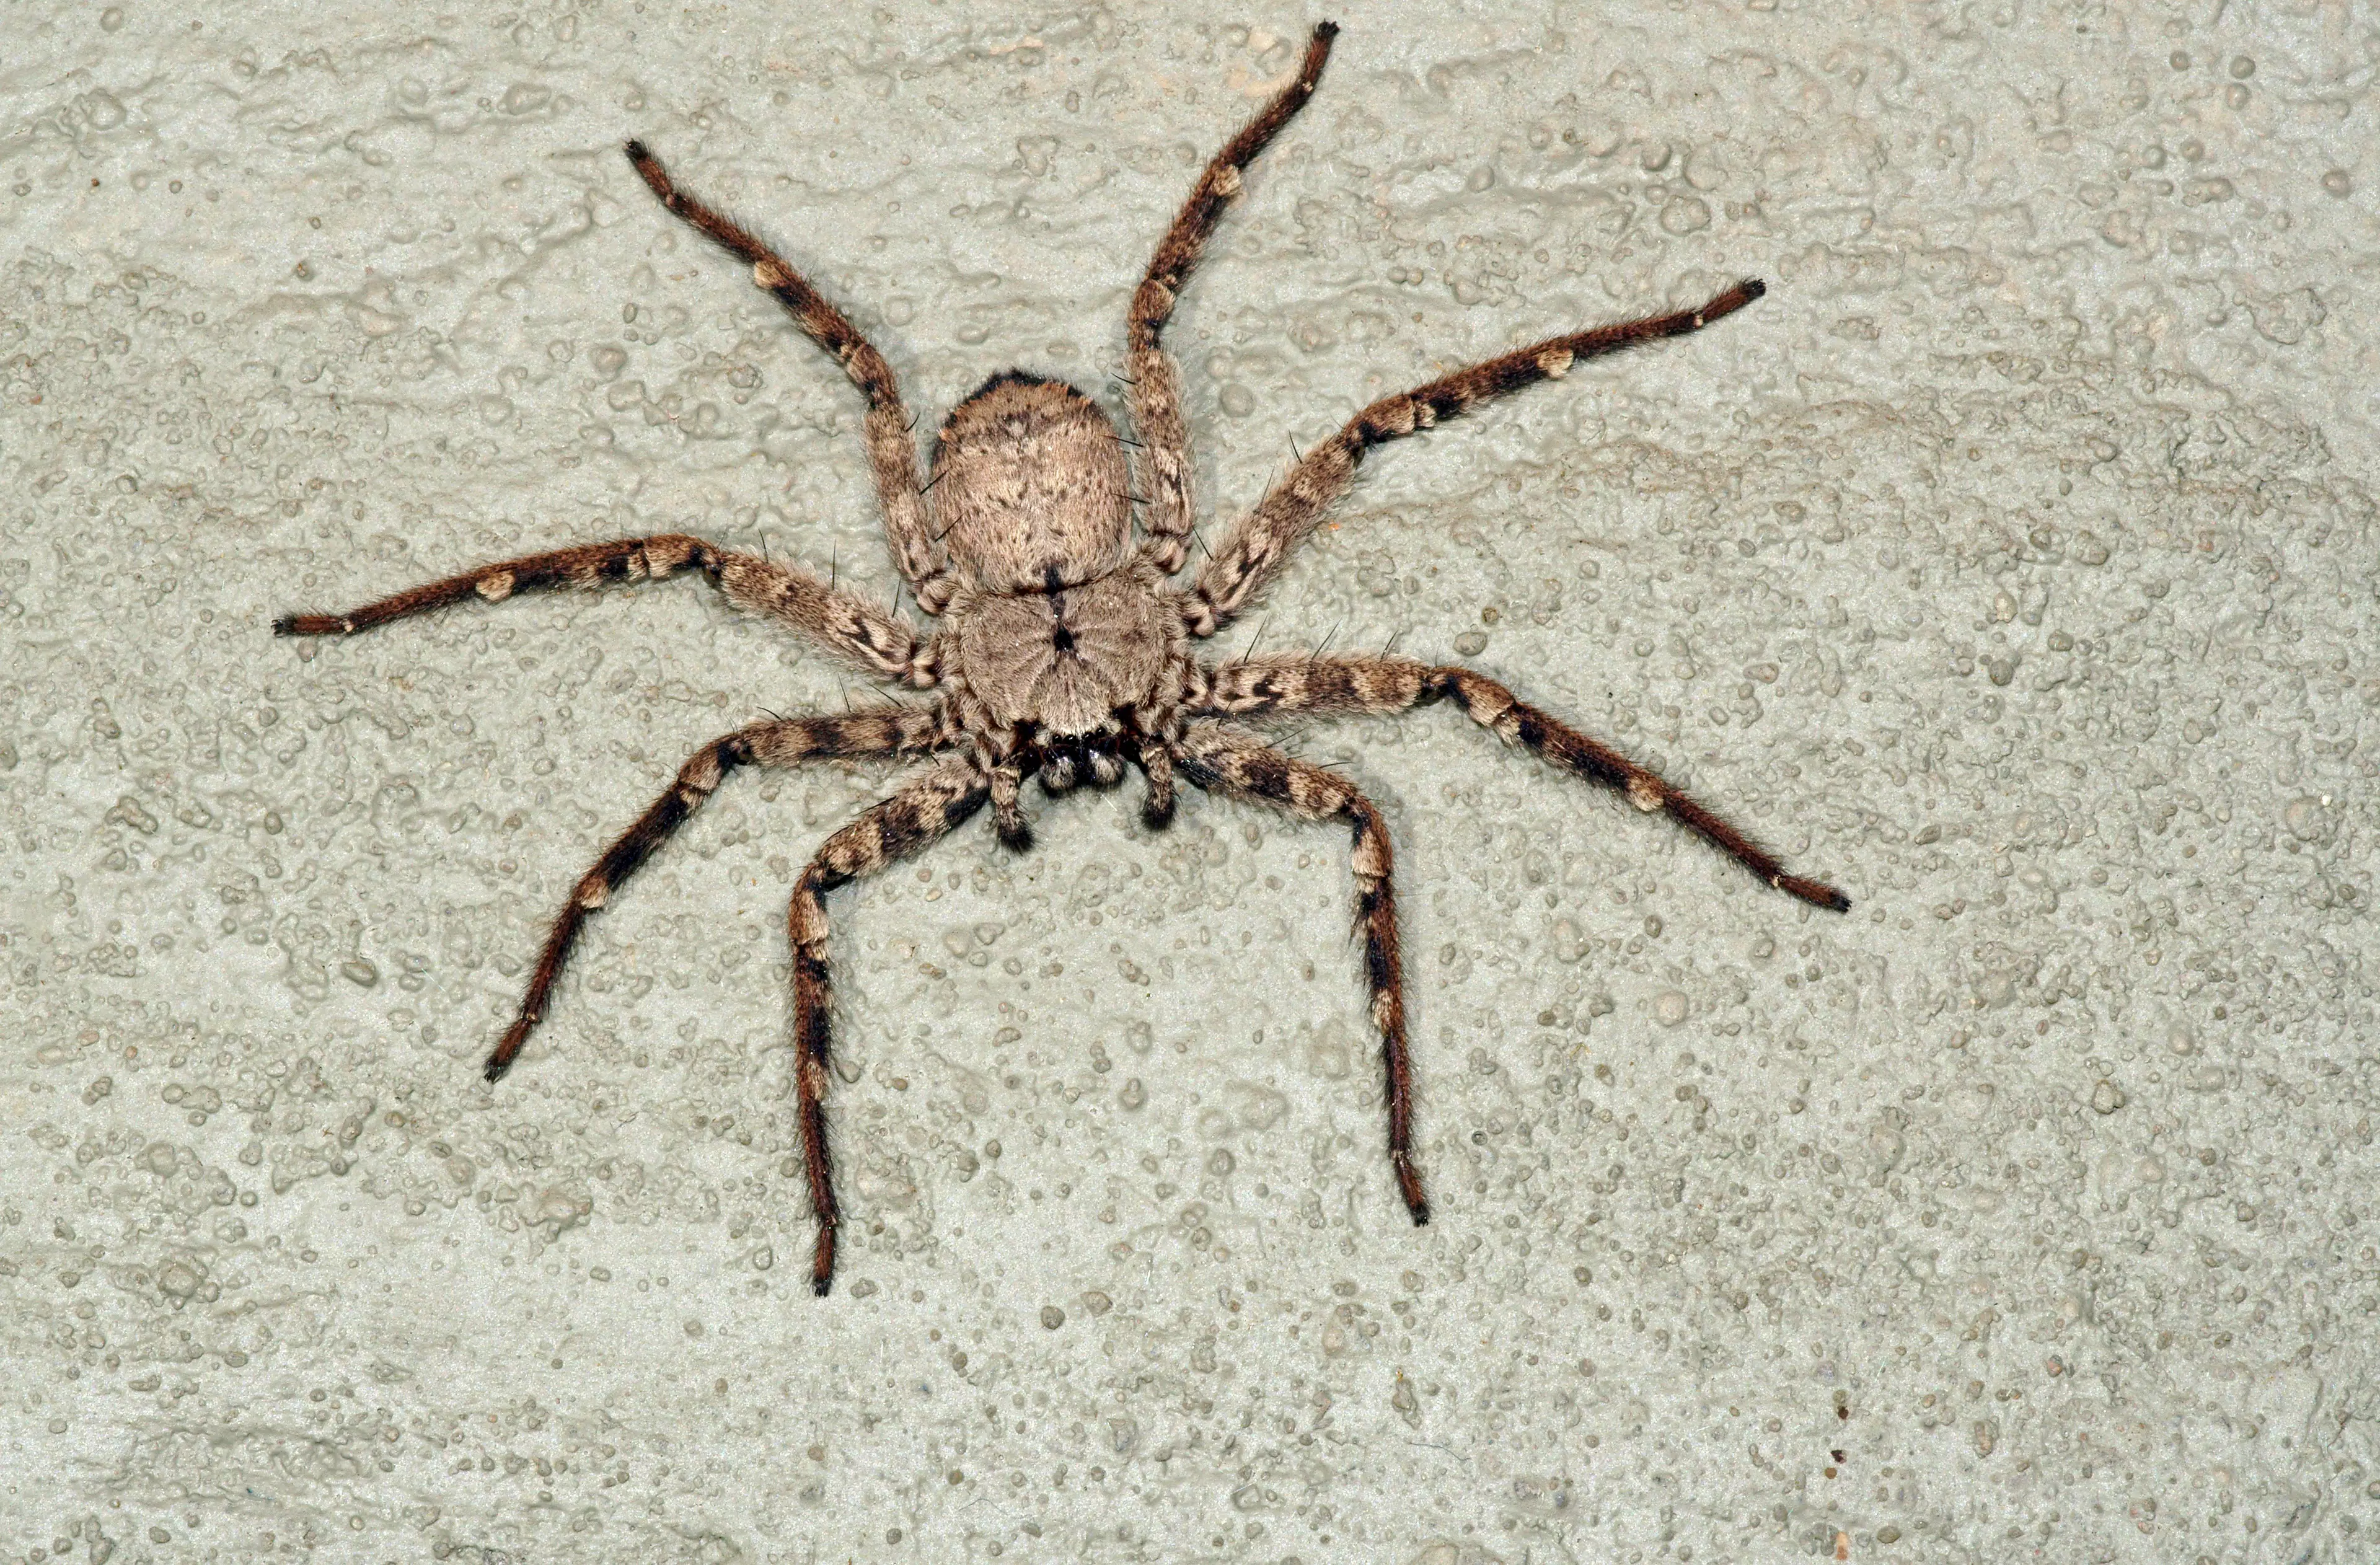 Some huntsman species can grow to have a legspan of 25-30cm (